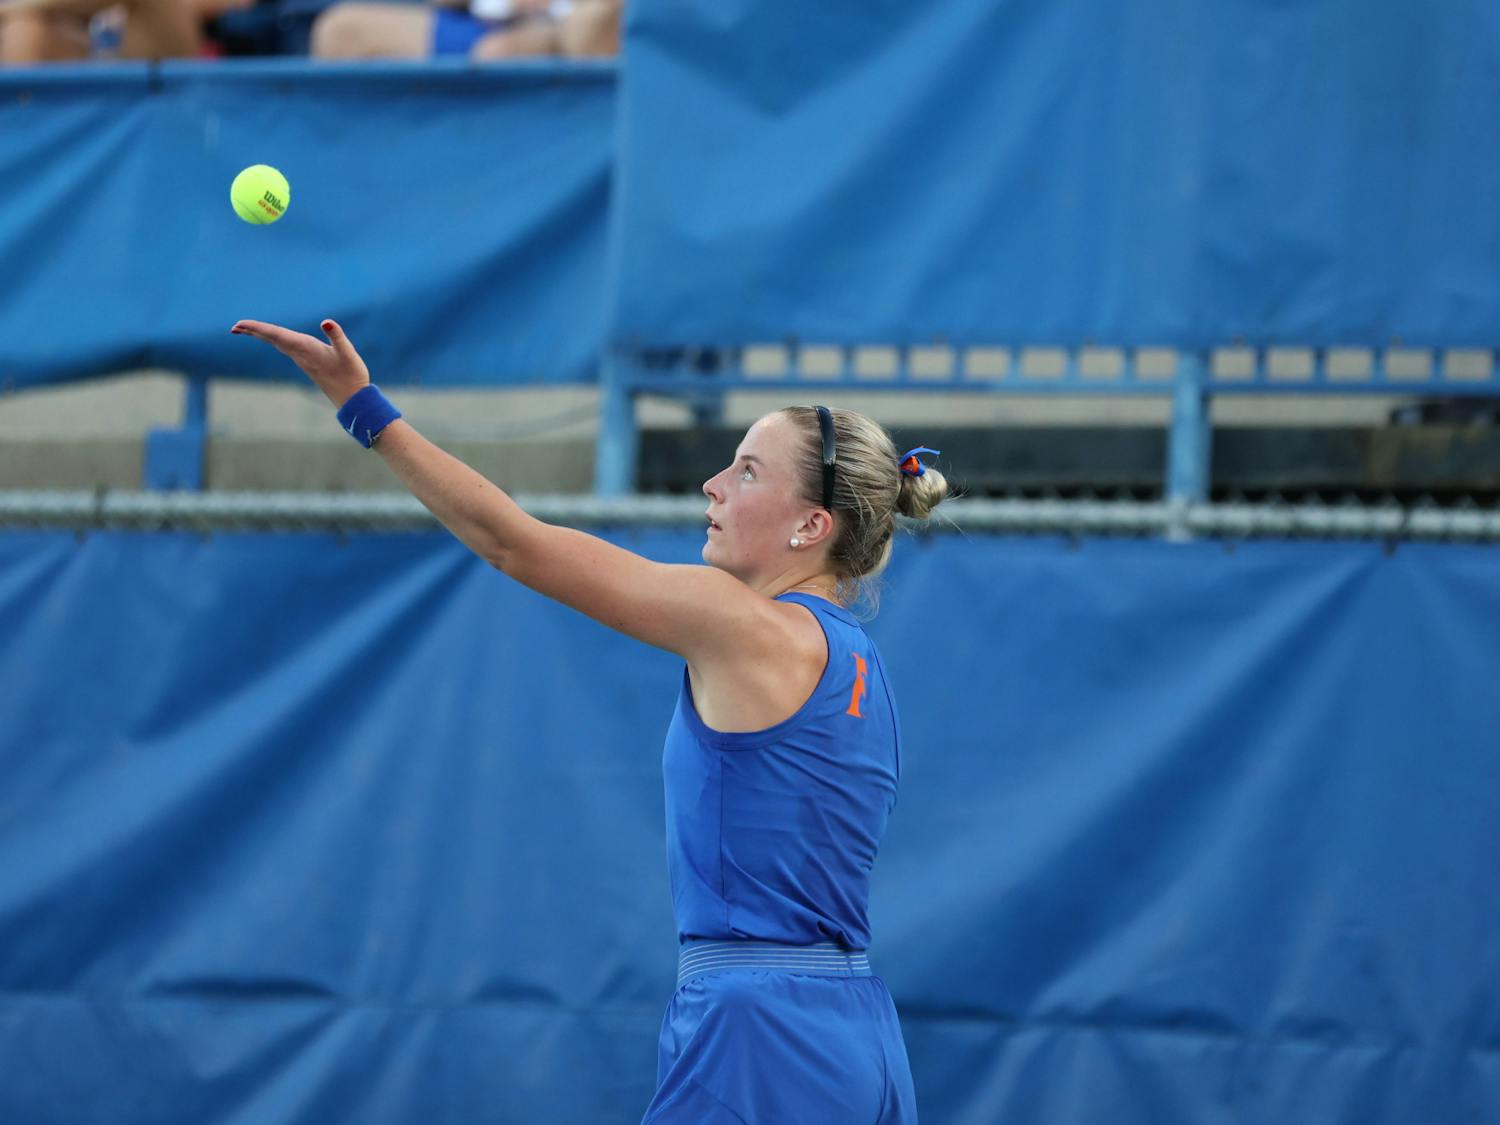 Florida junior Sara Dahlstrom prepares to serve the ball during the Gators' match against the Pepperdine Waves Friday, Feb. 24, 2023 at Alfred A. Ring Tennis Complex in Gainesville, Florida.